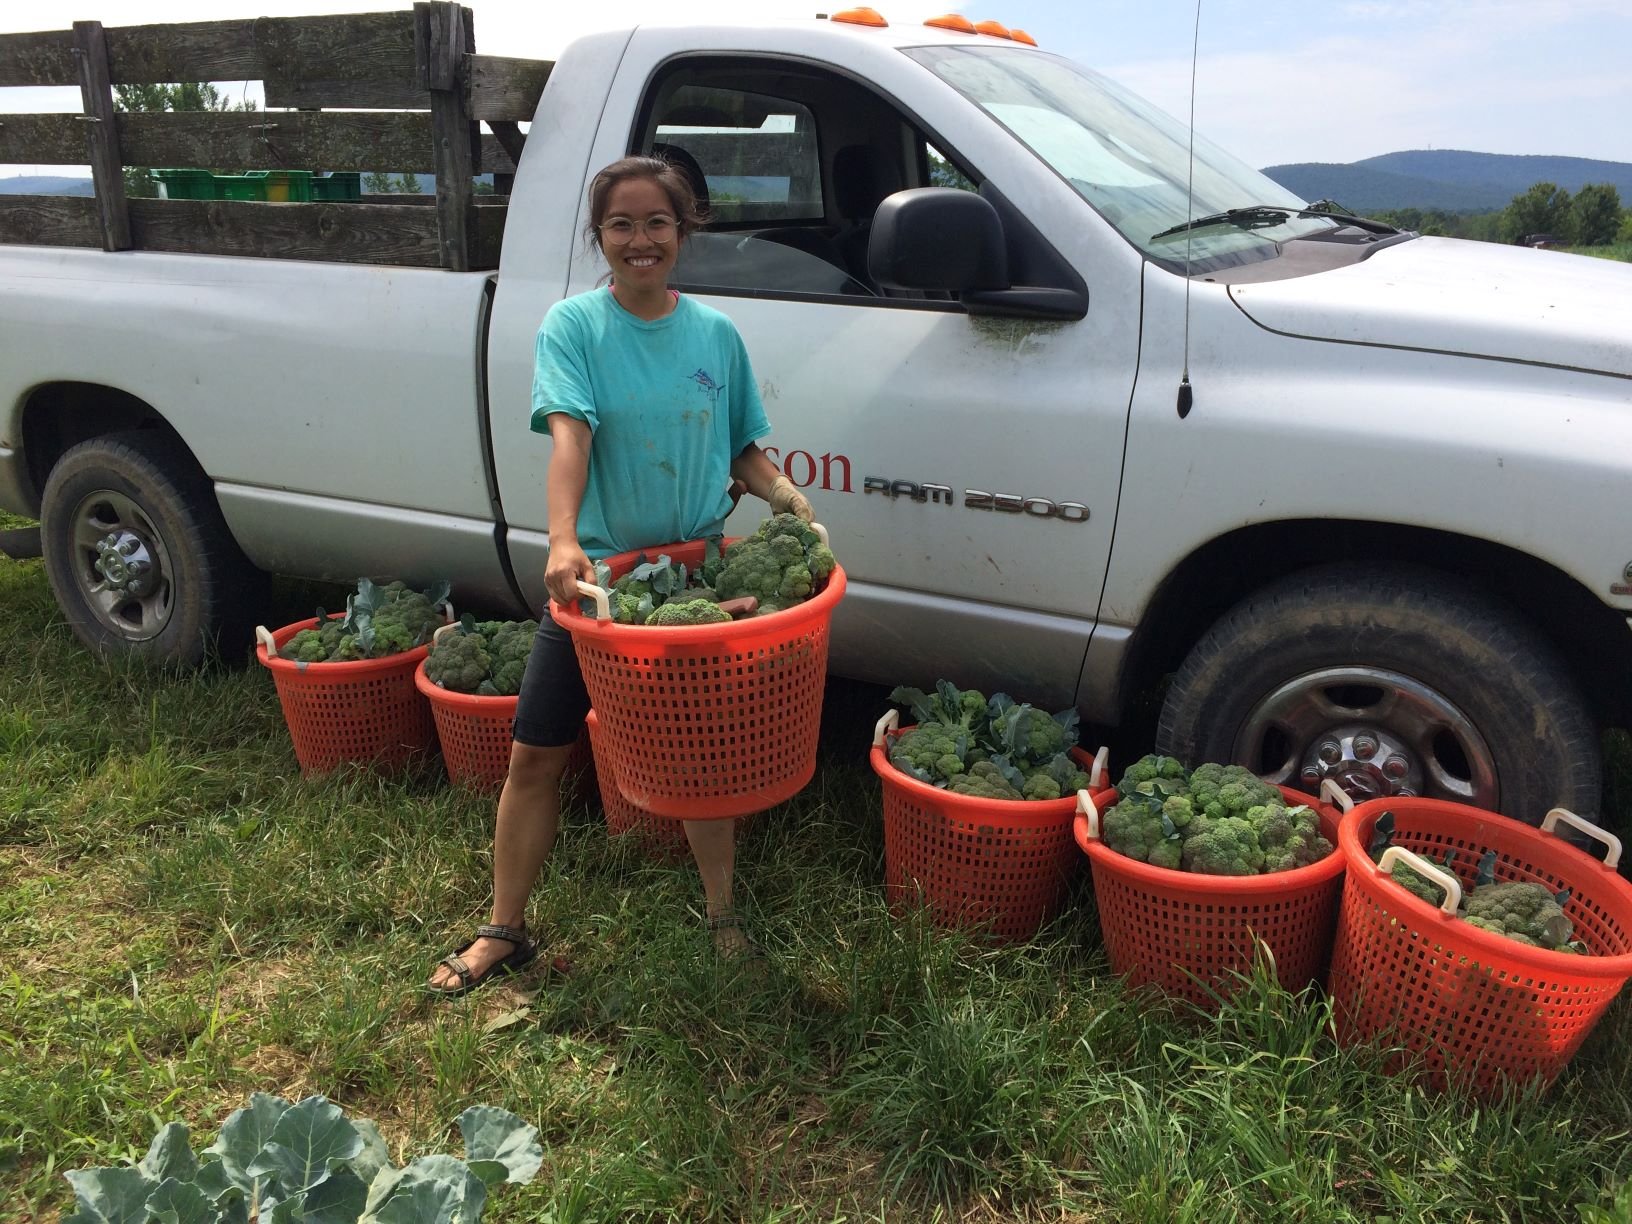 Friday CSA: Dickinson College Farm Field Notes for Week of July 1st